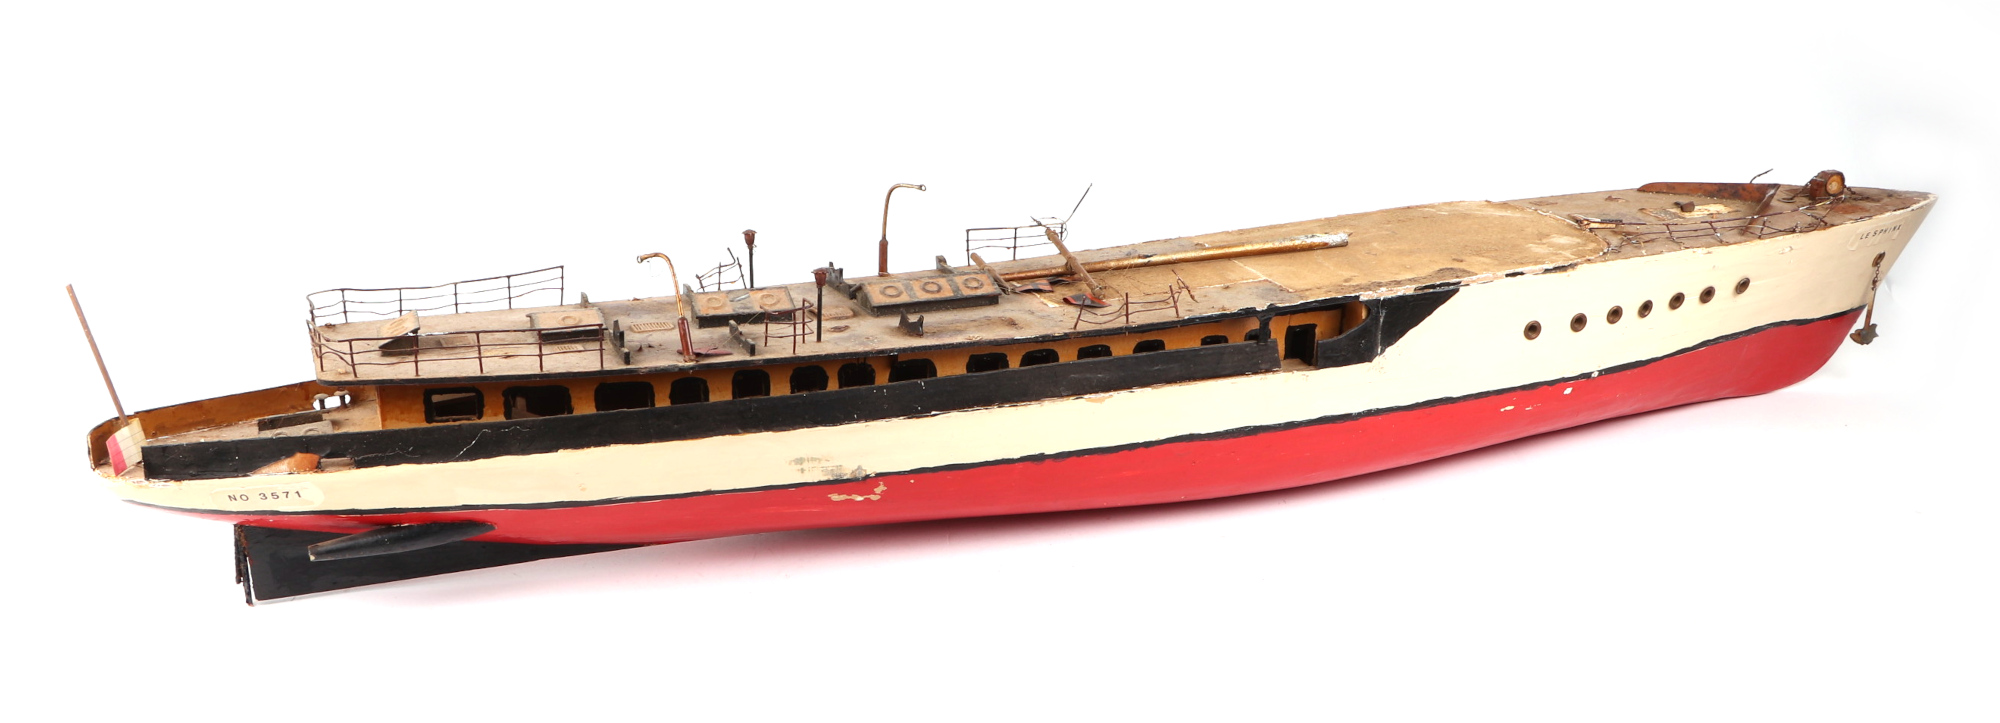 A scratch built model of a warship with painted wooden hull, approx 125cm long; together with - Image 8 of 13